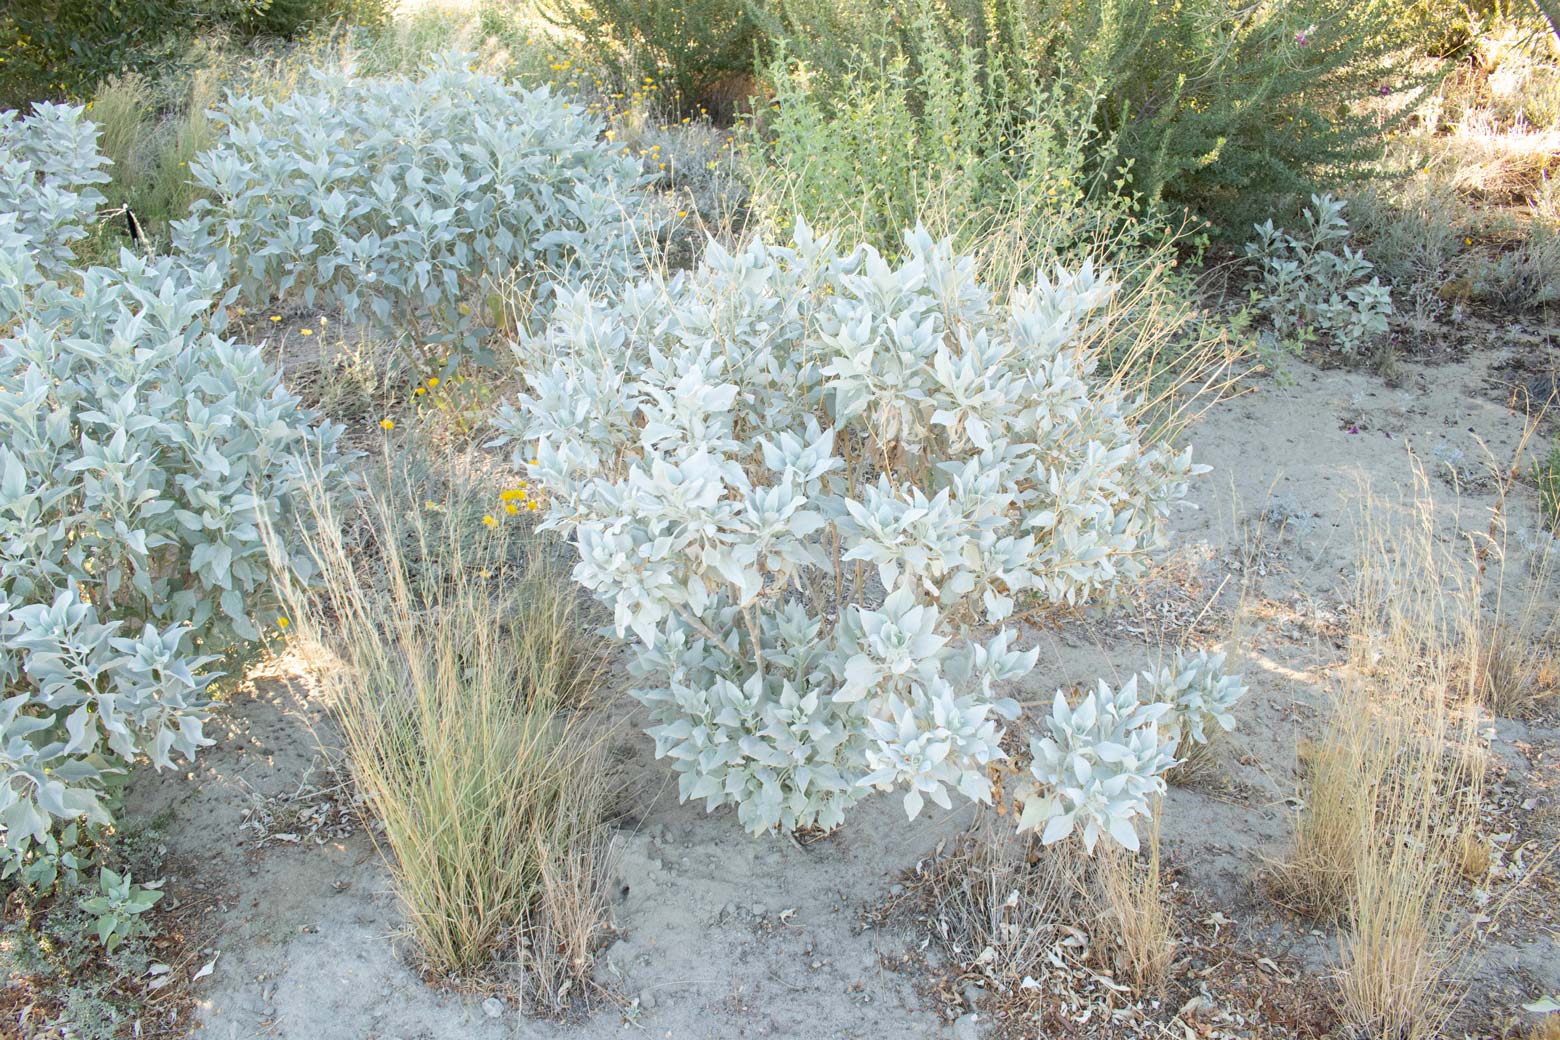 A Brittlebush without blooms among grasses.